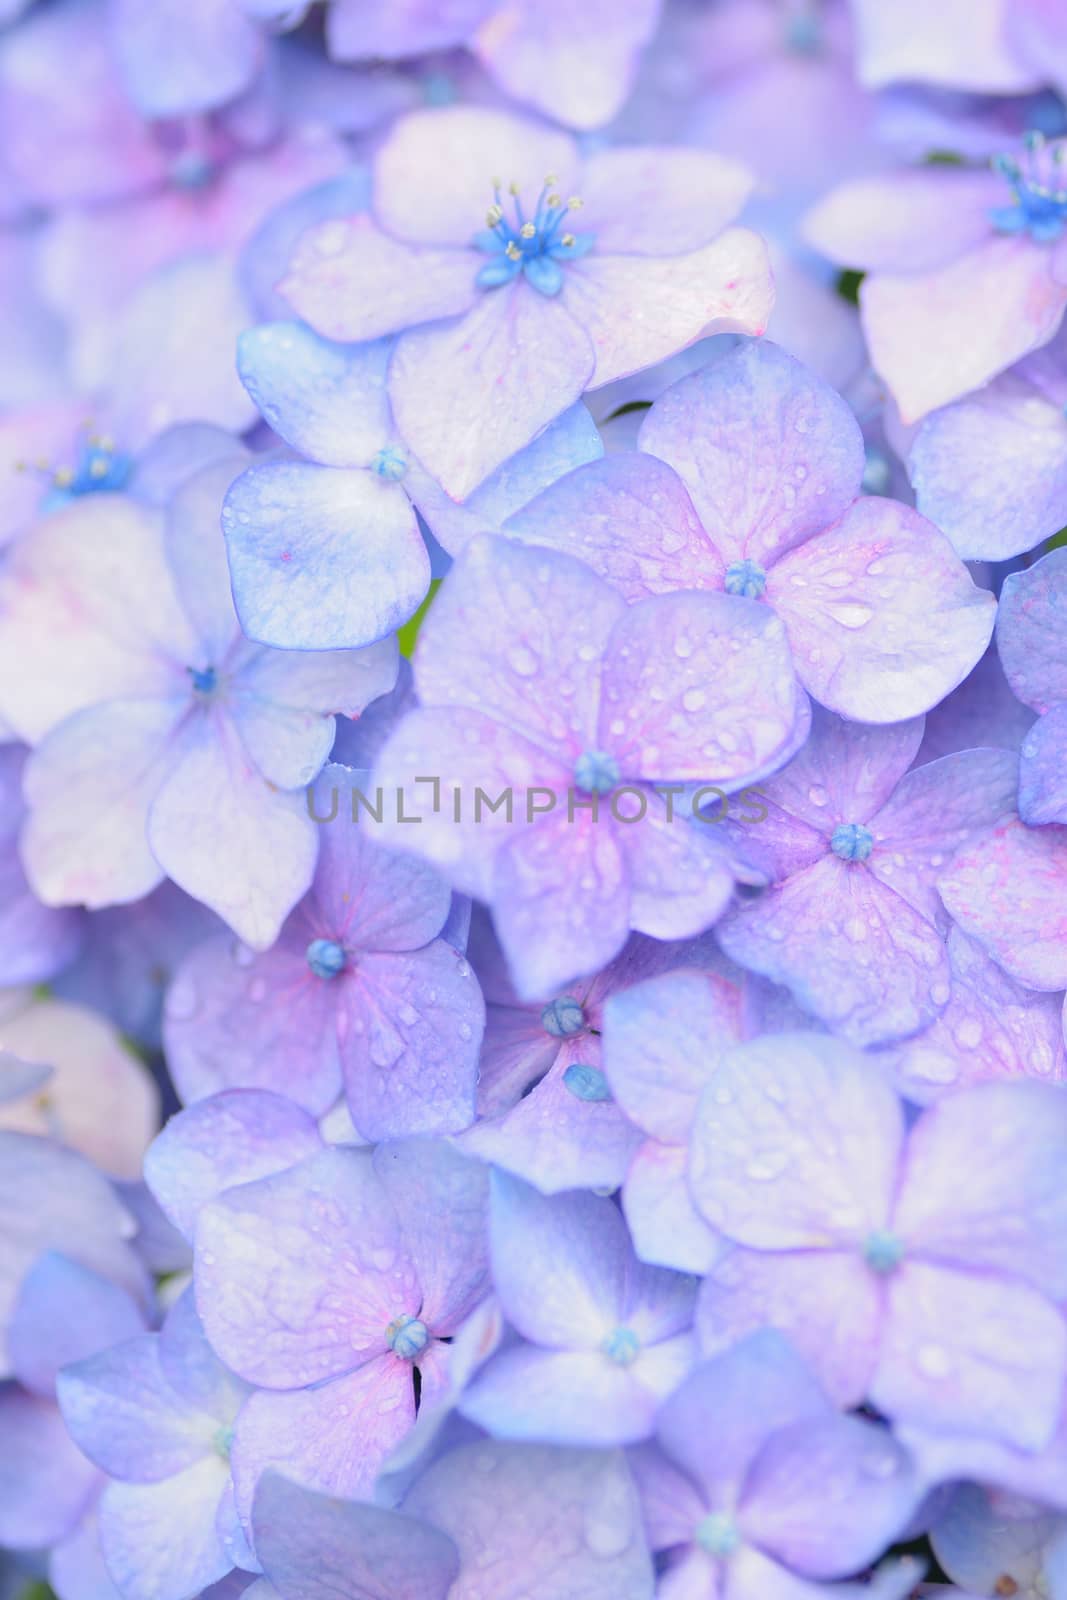 Macro texture of blue colored Hydrangea flowers with water droplets by shubhashish